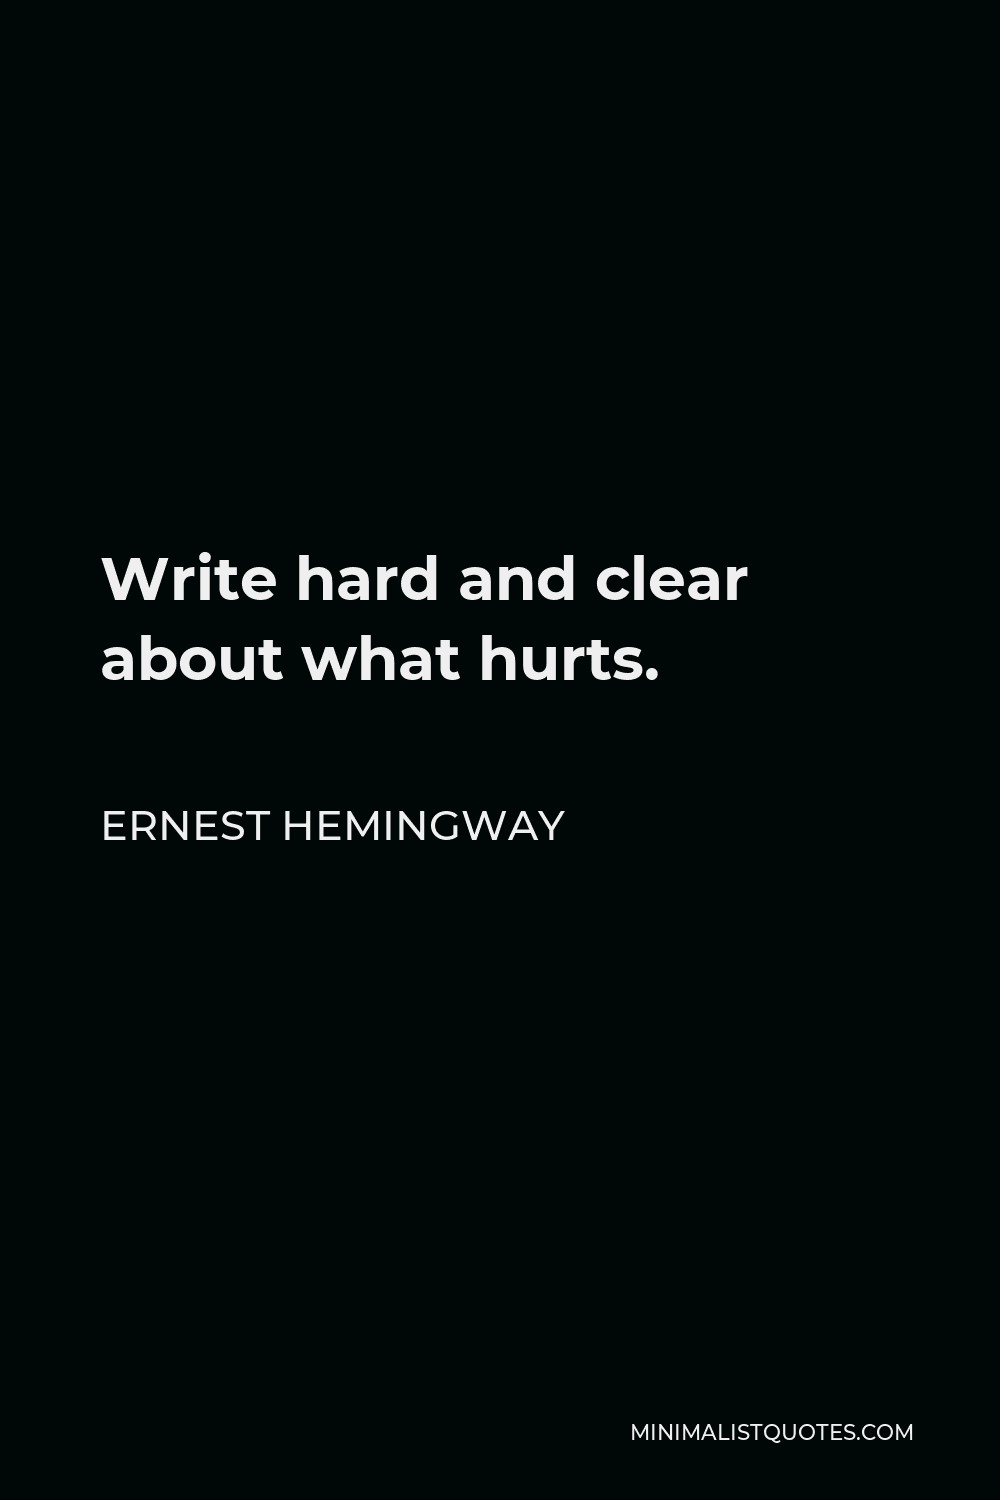 Ernest Hemingway Quote - Write hard and clear about what hurts.